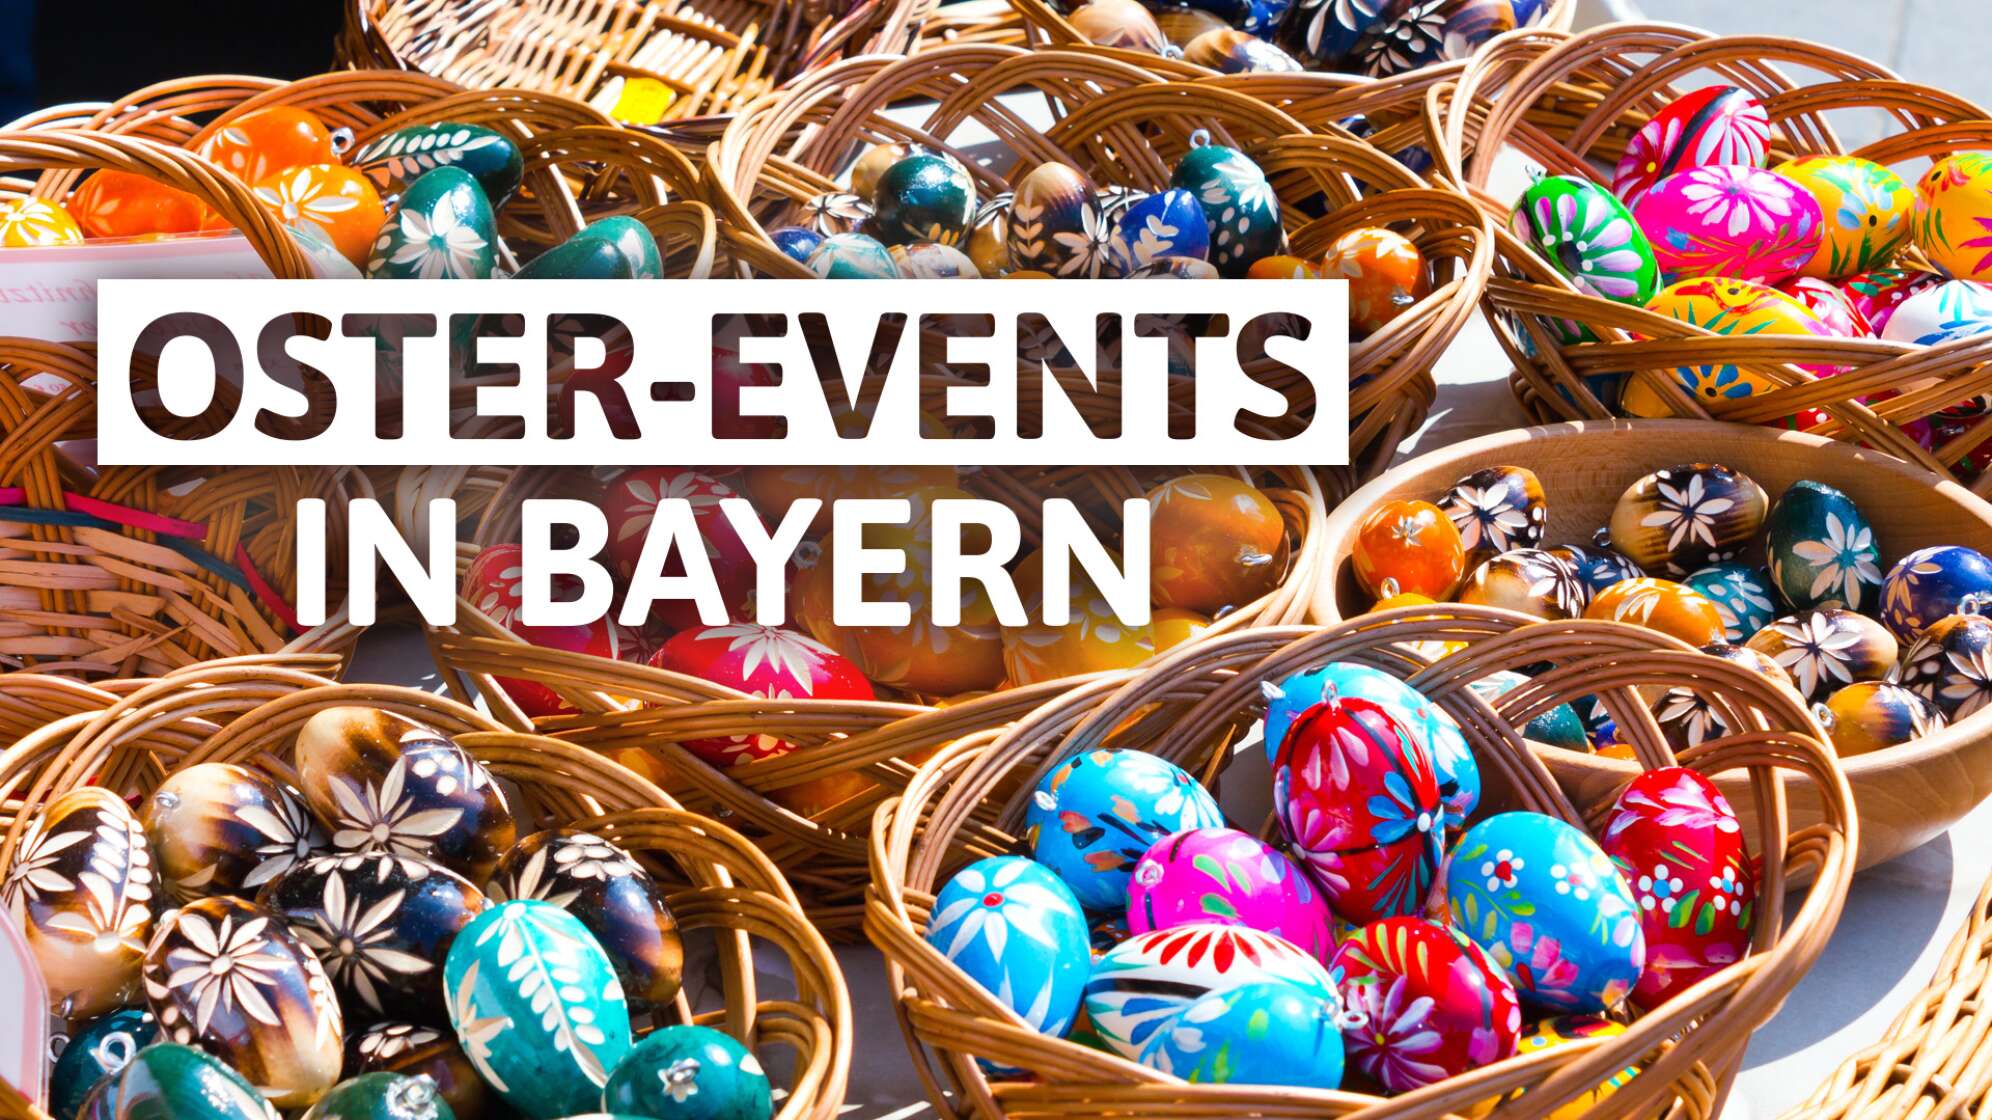 Oster-Events in Bayern